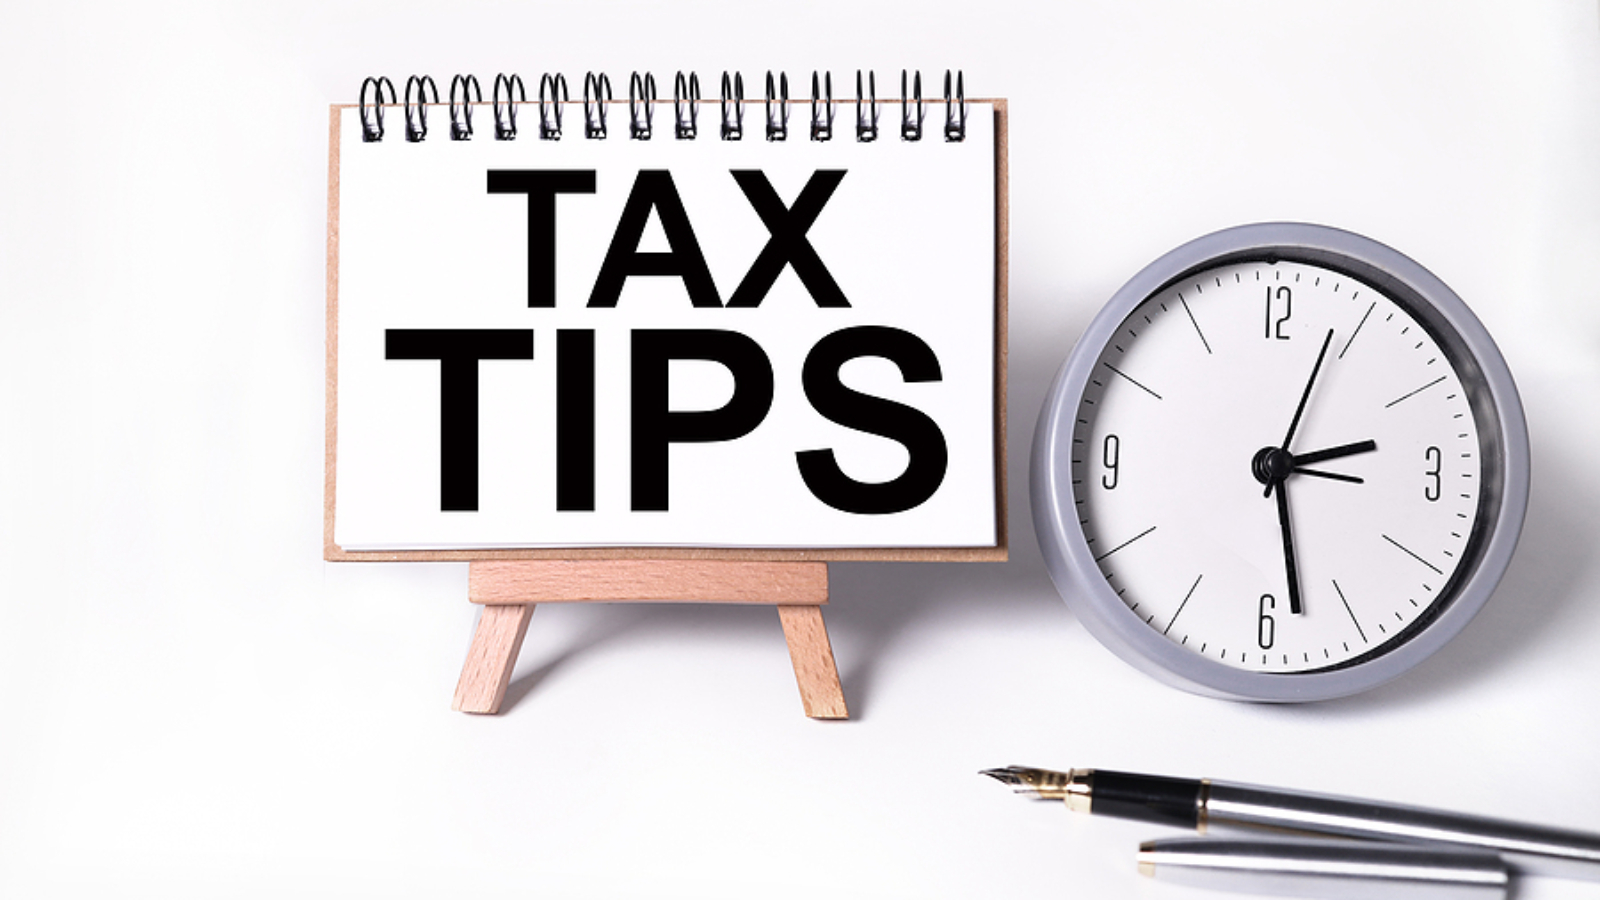 TAX TIPS. text on white notepad paper on white background. near the table clock